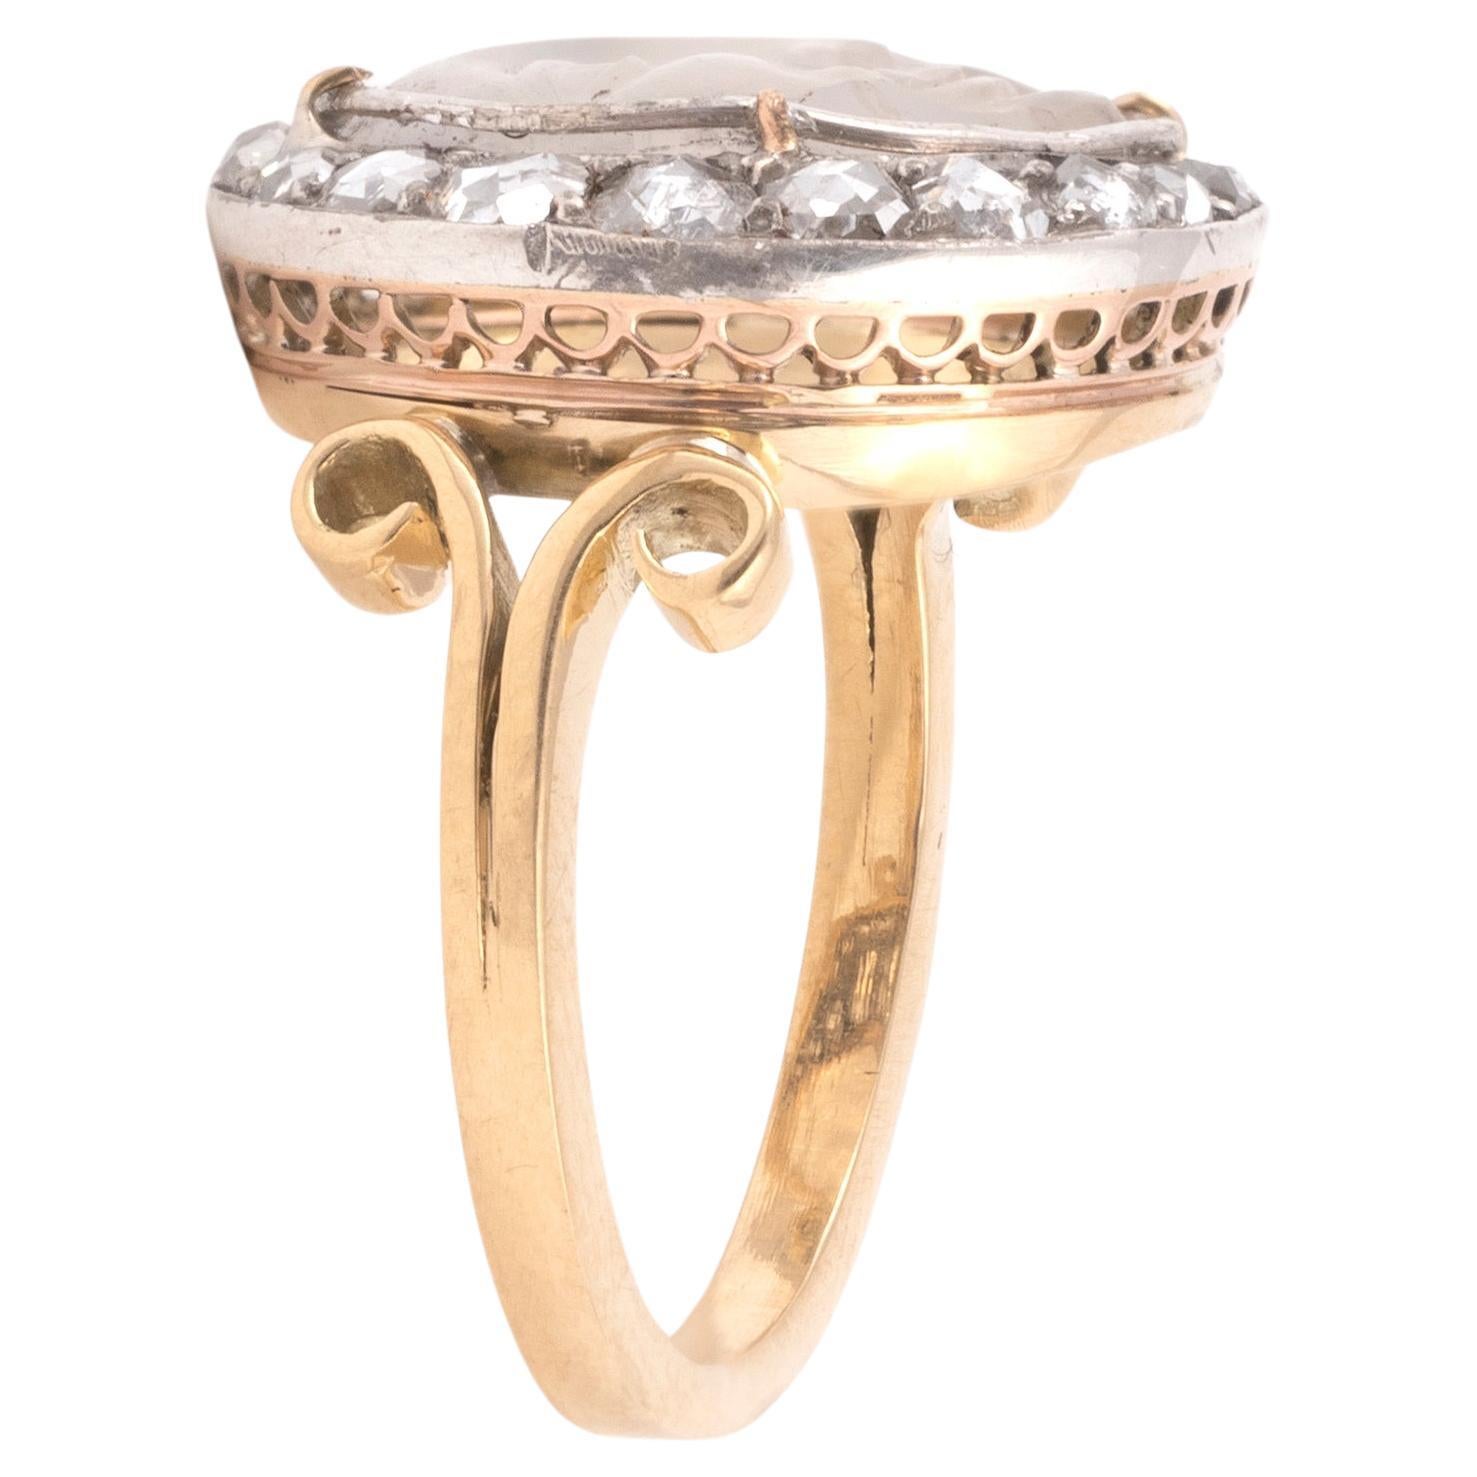 A late 19th century man in the moon ring, set in silver and gold with a carved moonstone within a rose diamond. On a gold reeded shank with bifurcated shoulders and gold under bezel.
English, mid to late 19th century.
Diameter 2cm / ¾''
Size